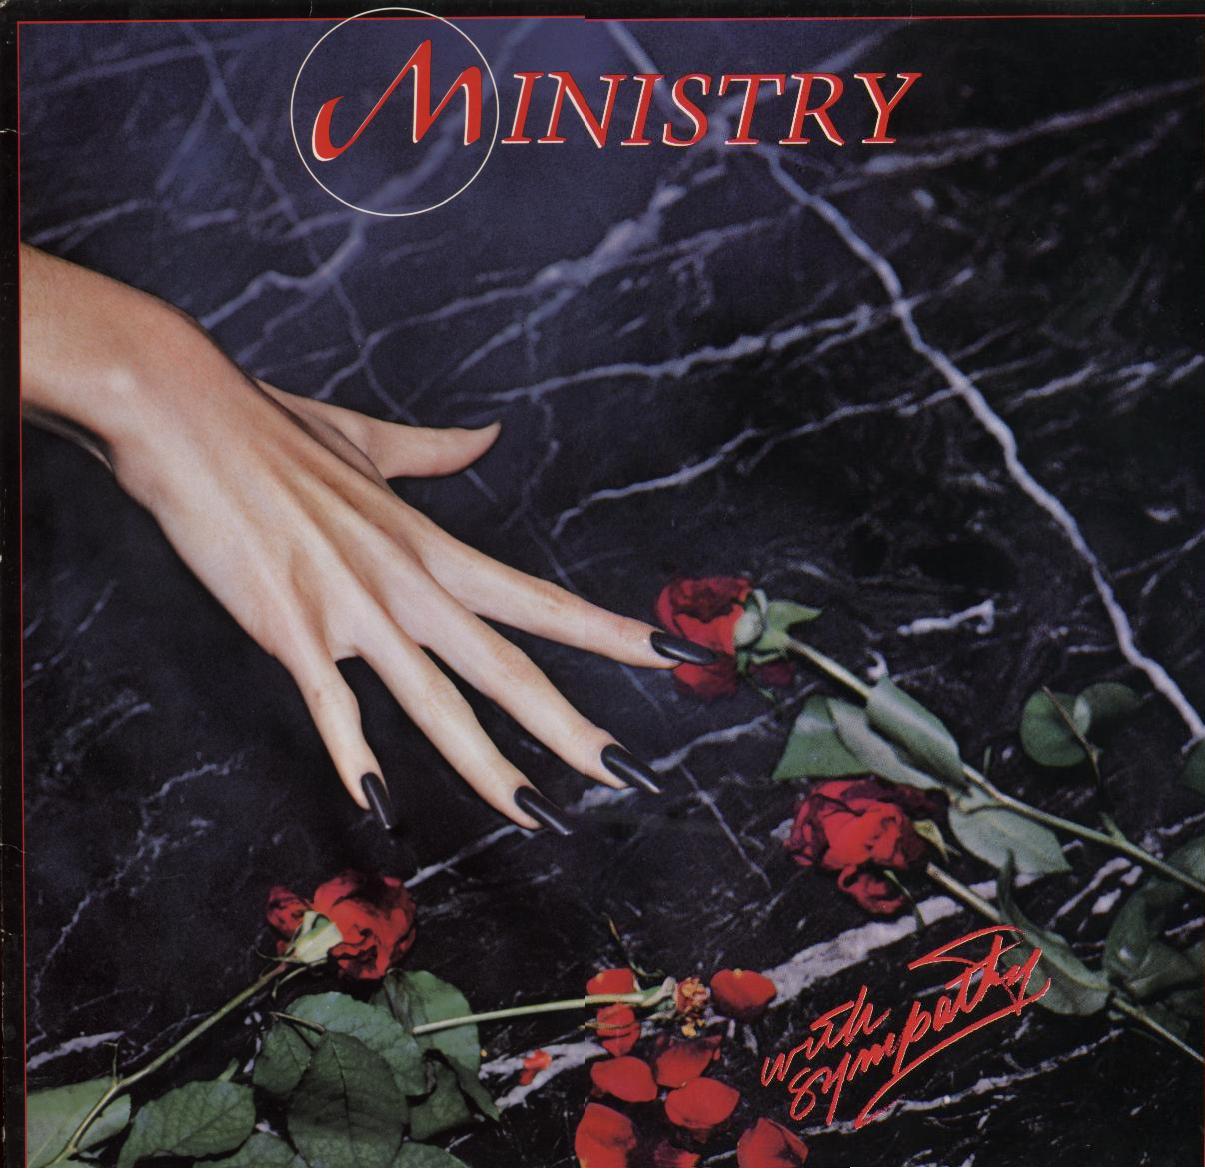 Ministry "With Sympathy" Vinyl